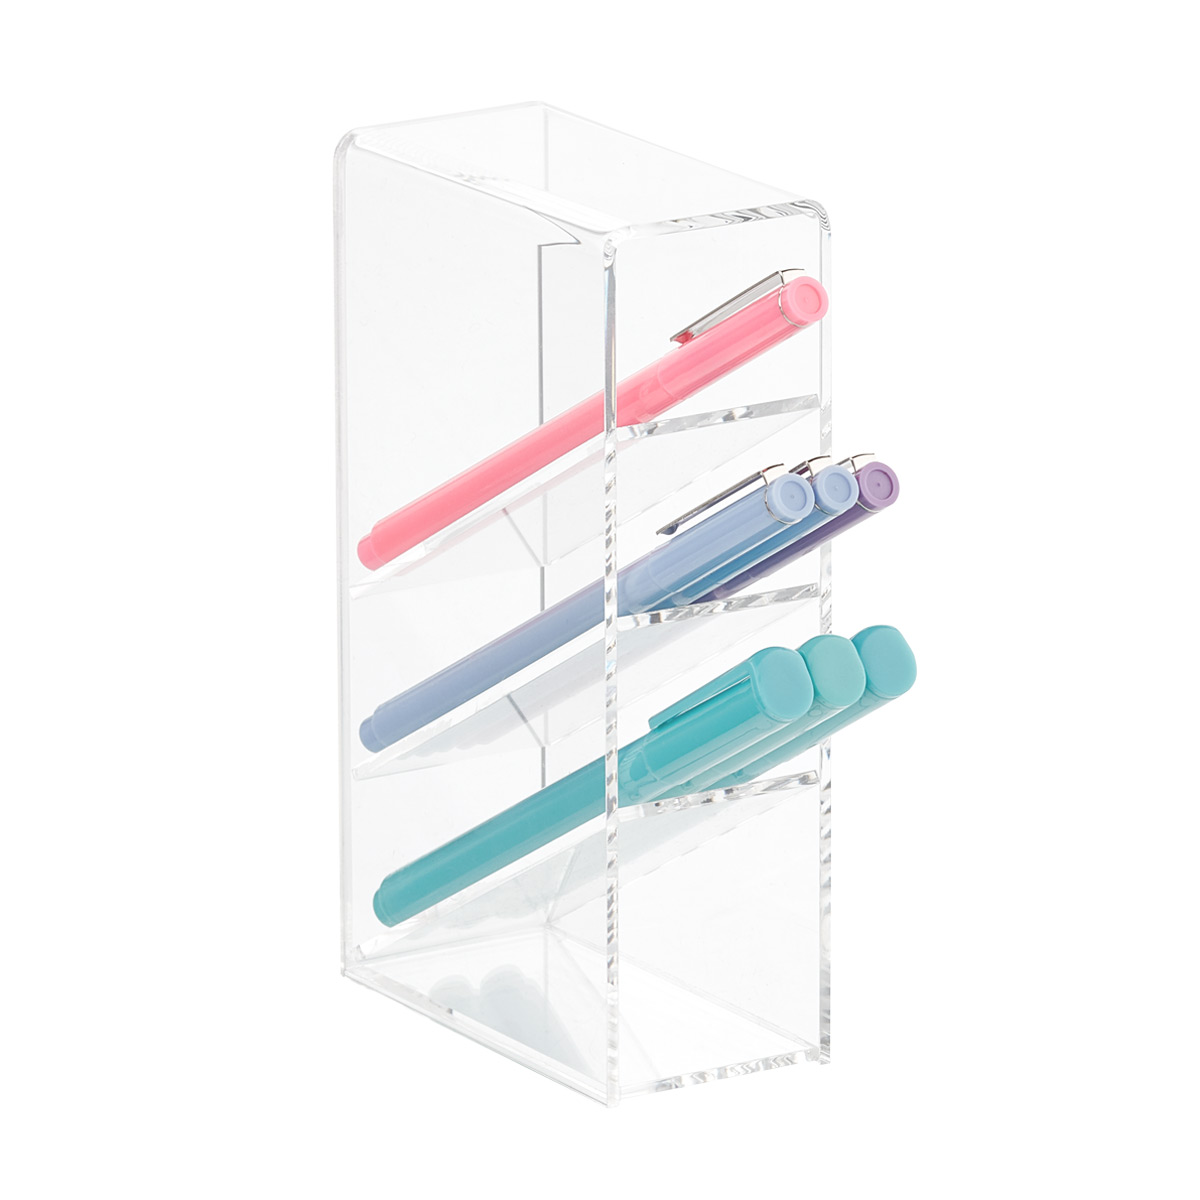 Slanted 4-Section Acrylic Pen Holder | The Container Store